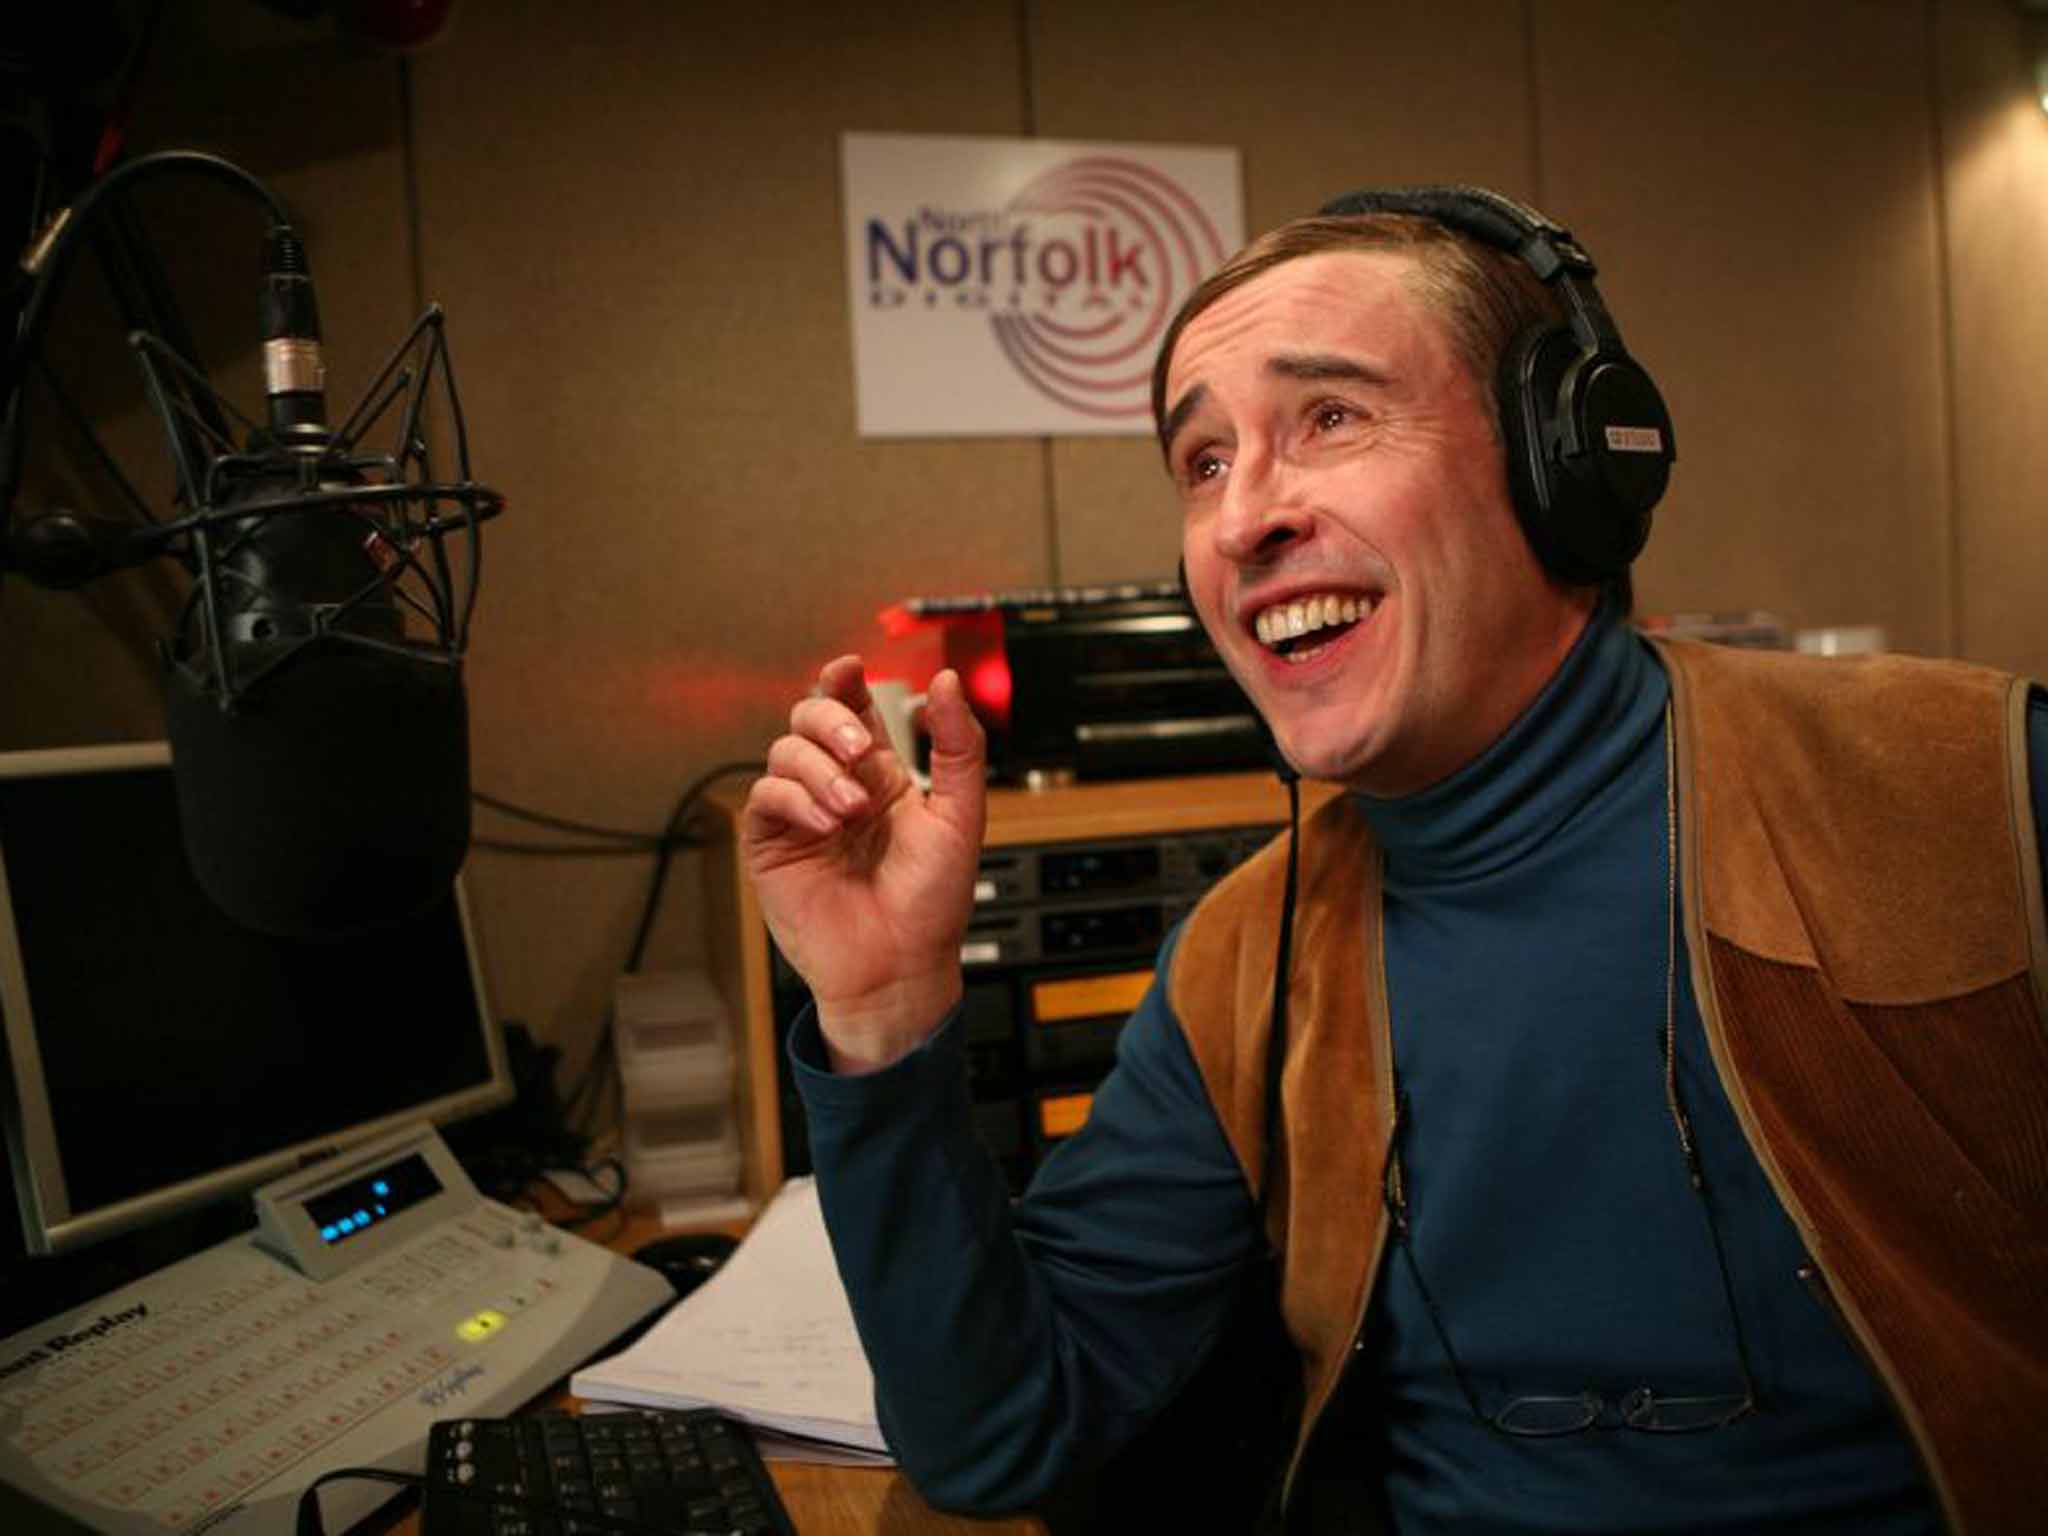 &#13; Alan Partridge, the fictional 'king of chat', has been given a run for his money &#13;